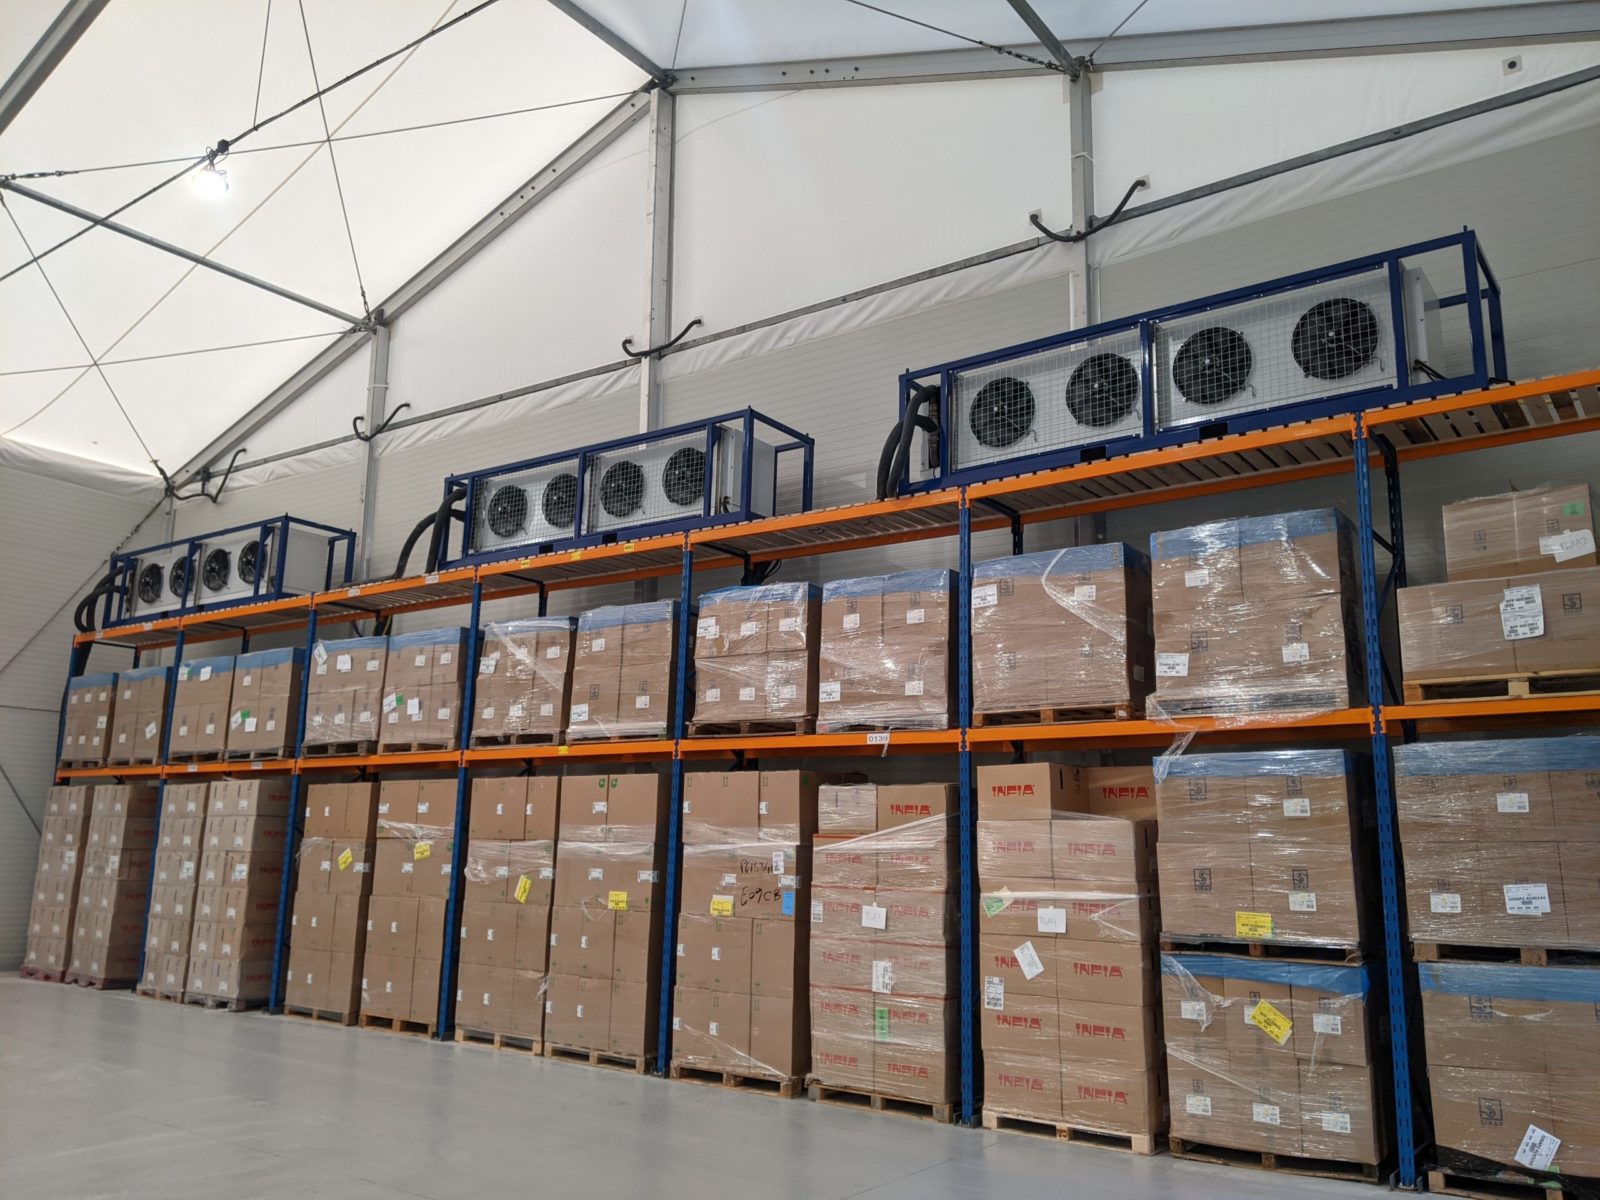 We can fit cooling into temporary fruit coldstores to maintain any temperature required. Our coolers are compact allowing maximum storage space